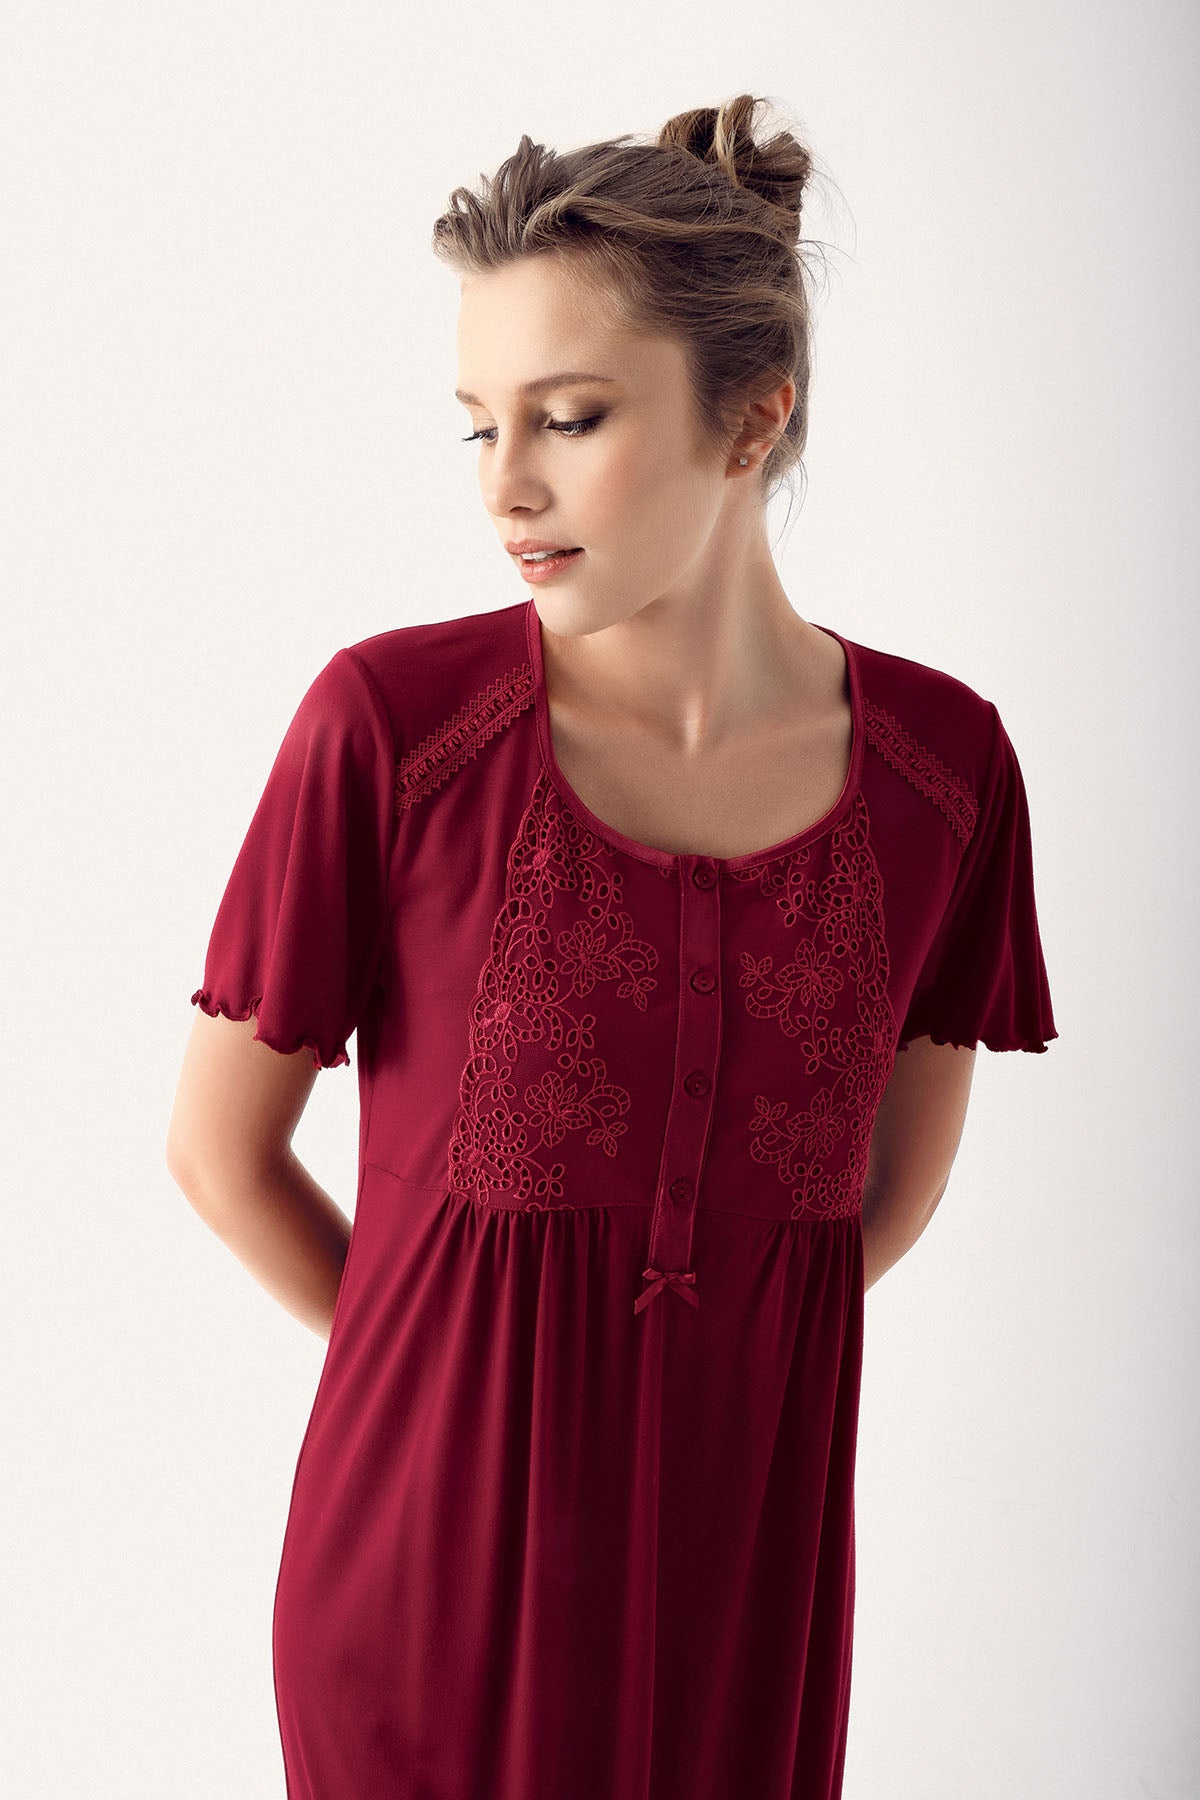 Shopymommy 14101 Collar And Skirt Detail Maternity & Nursing Nightgown Claret Red